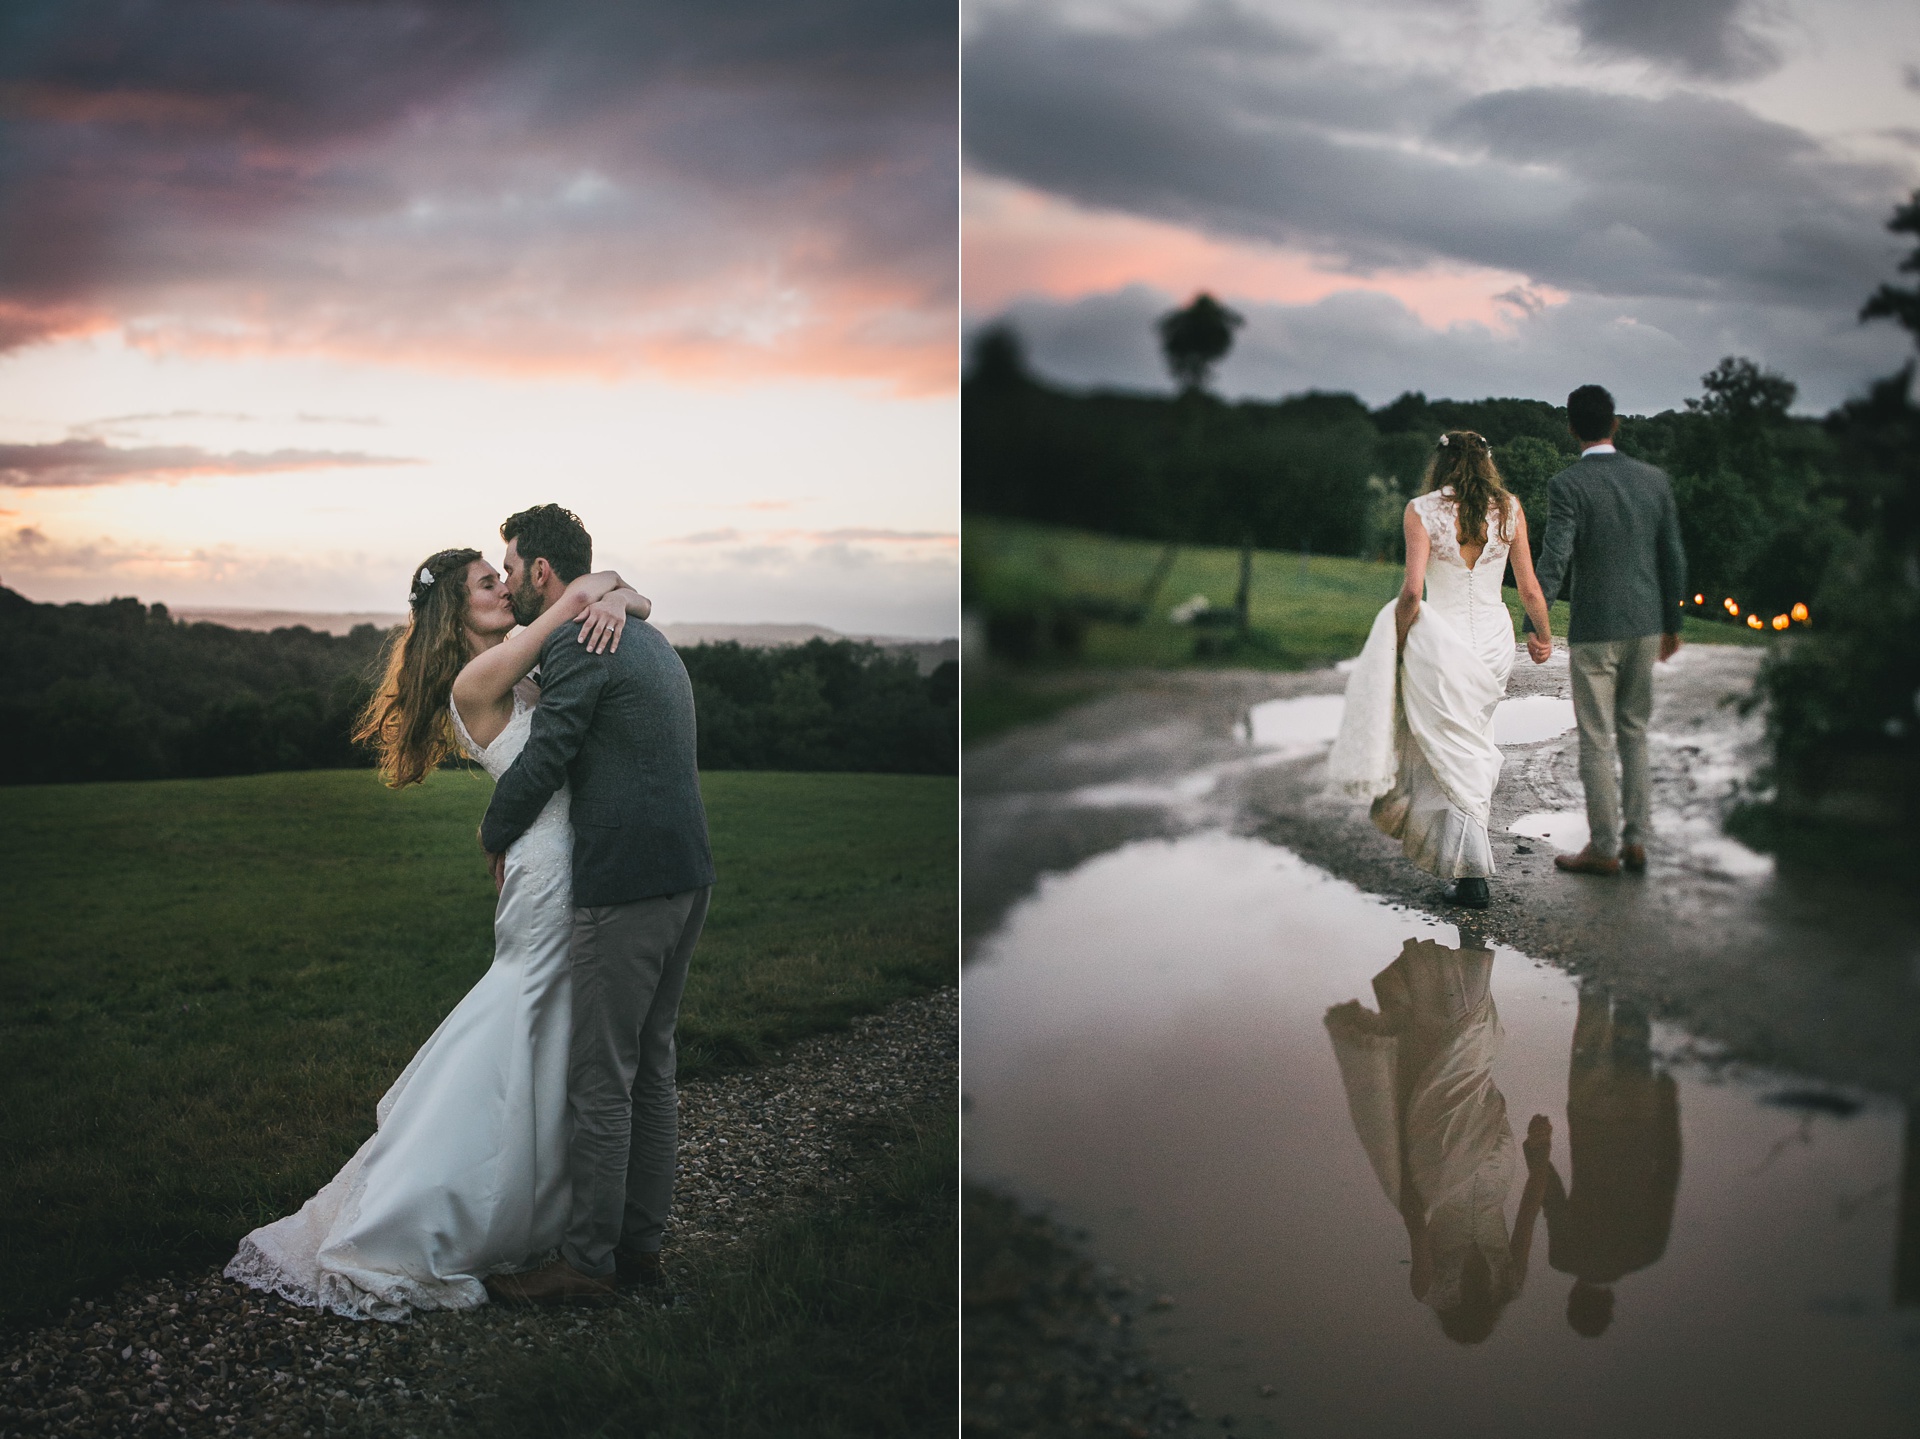 A bride and groom walking through muddy puddles holding hands at a wet weather wedding